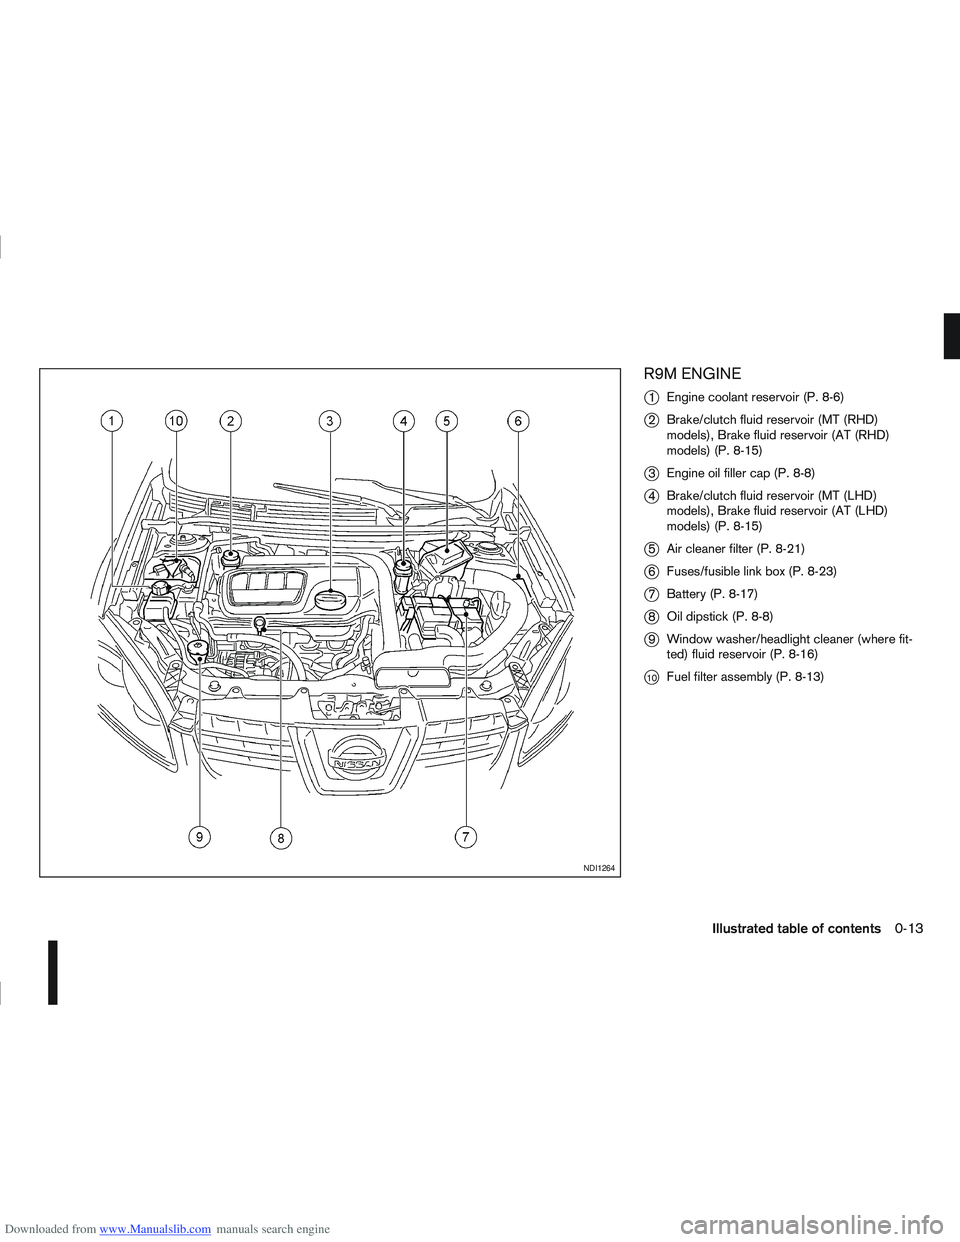 NISSAN QASHQAI 2006  Owners Manual Downloaded from www.Manualslib.com manuals search engine R9M ENGINE
j
1Engine coolant reservoir (P. 8-6)
j2Brake/clutch fluid reservoir (MT (RHD)
models), Brake fluid reservoir (AT (RHD)
models) (P. 8